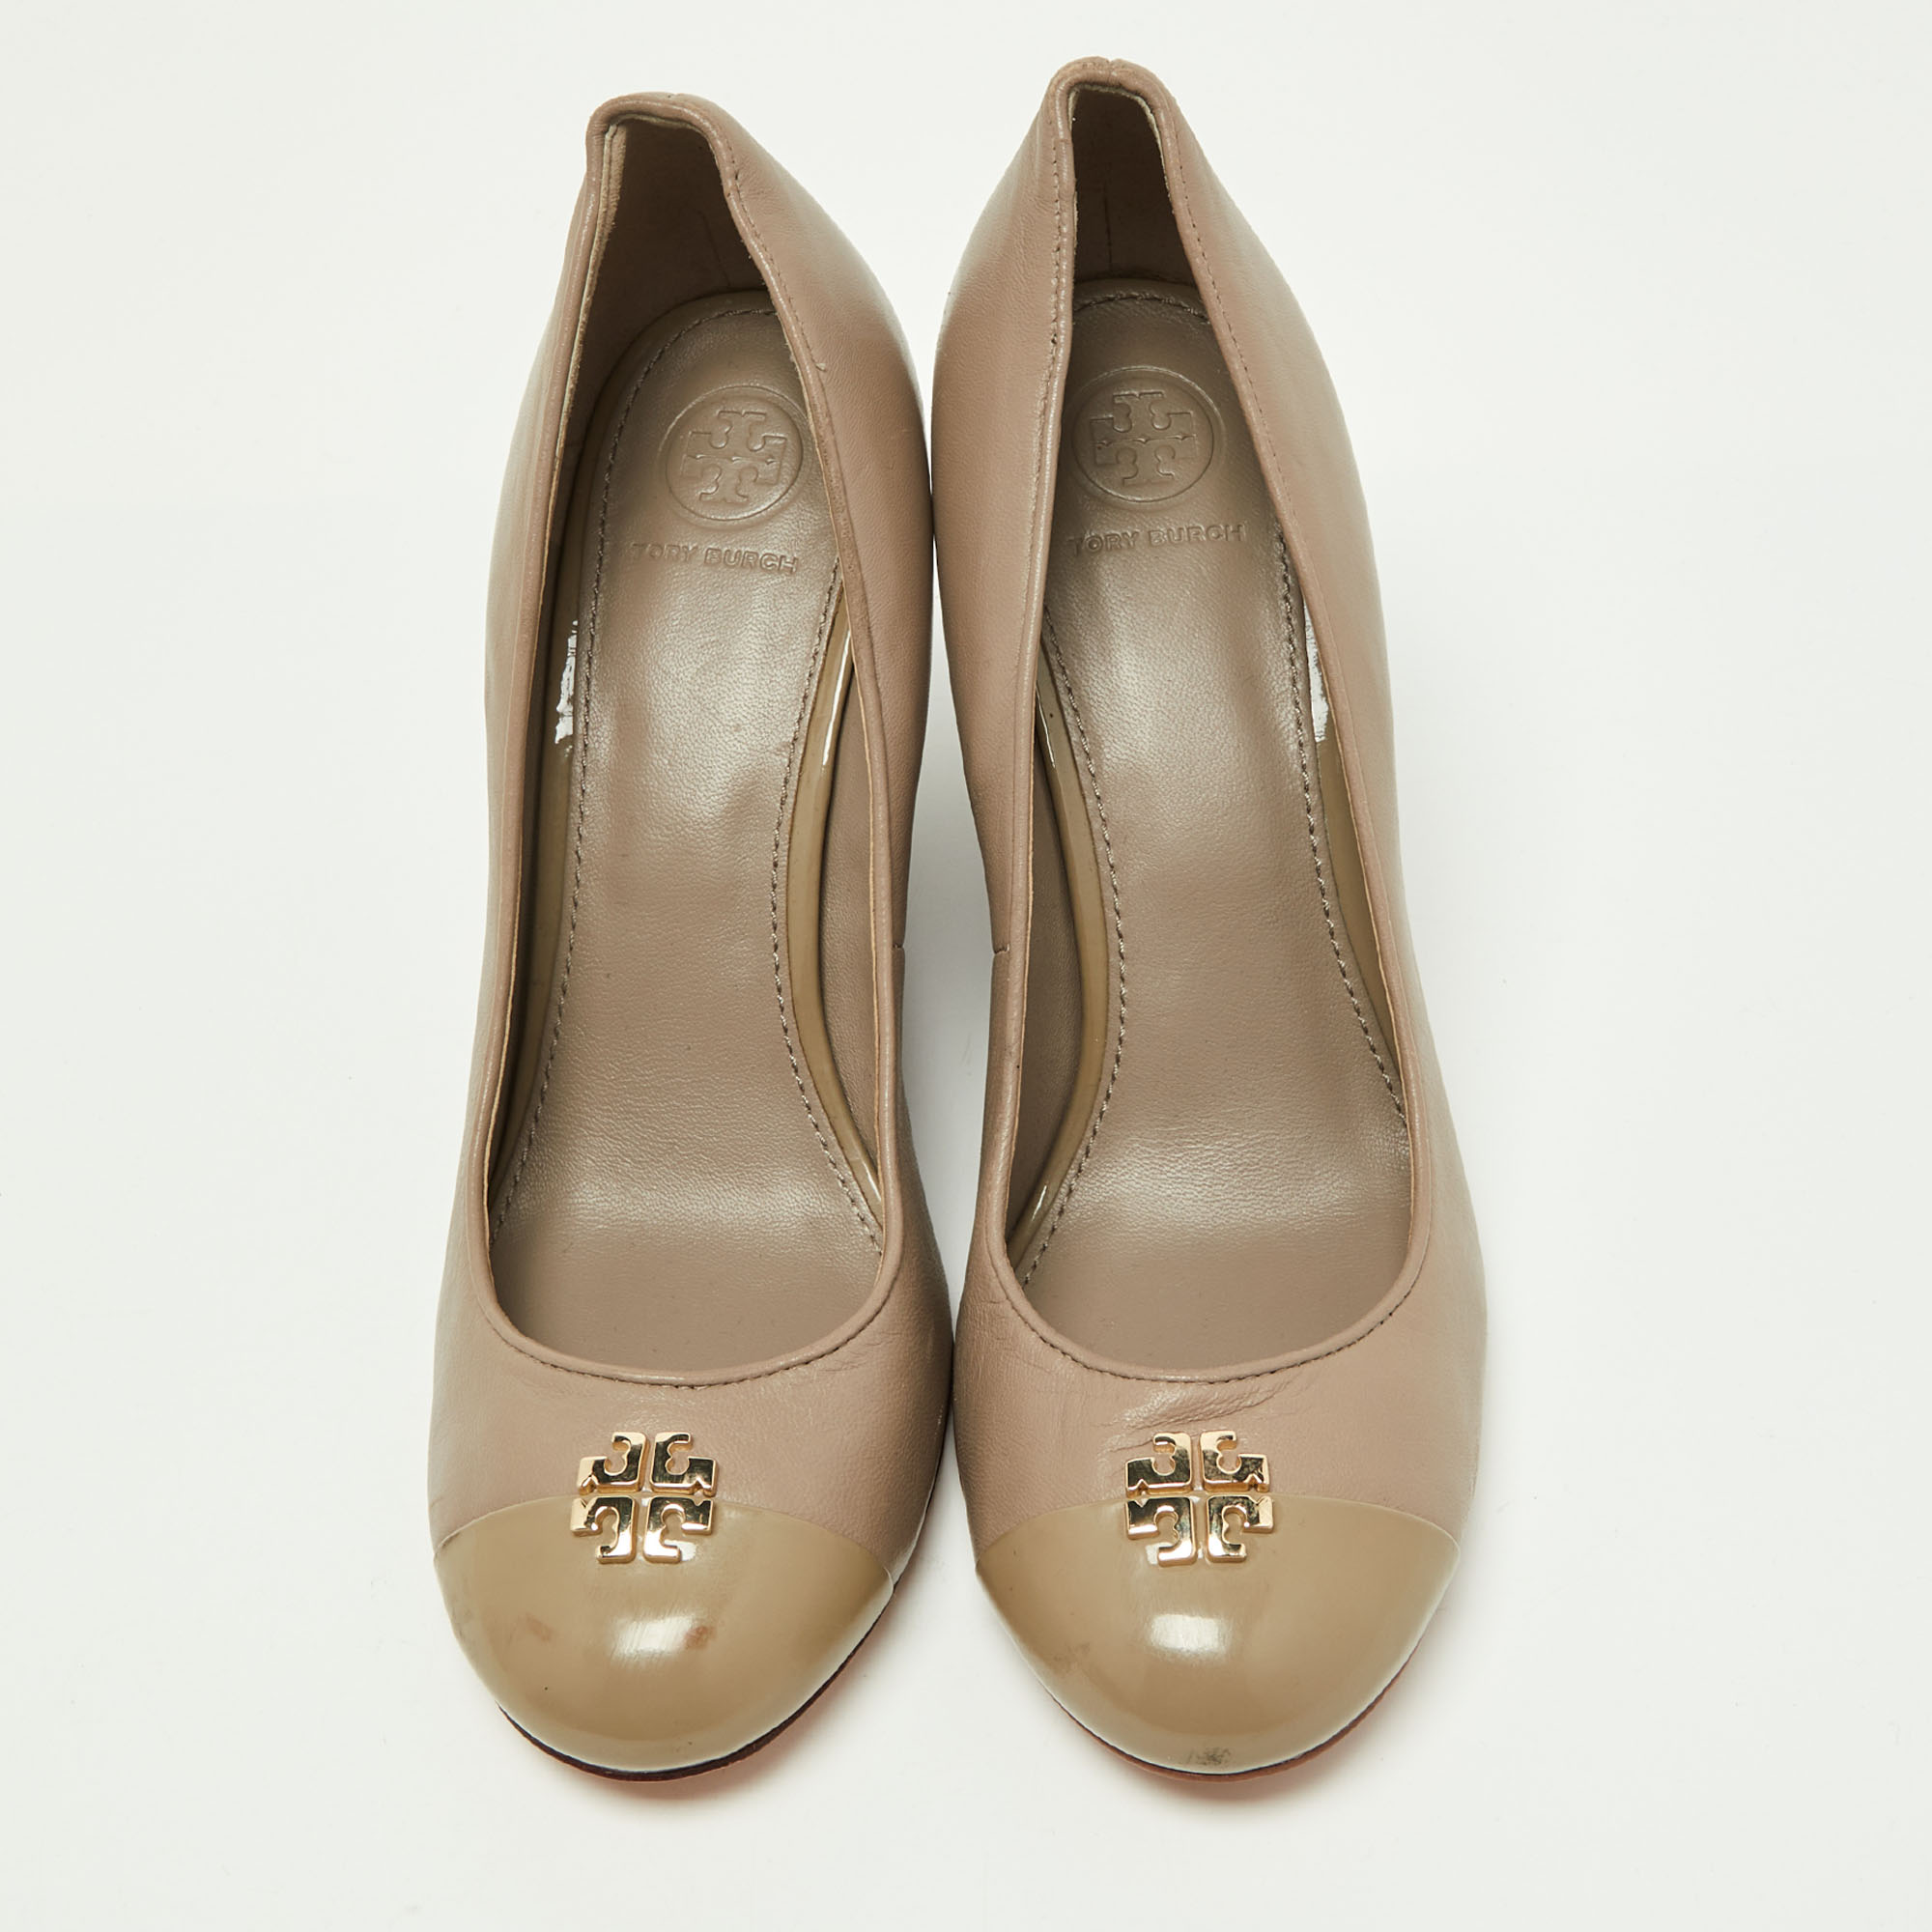 Tory Burch Beige Patent And Leather Wedge Pumps Size 39.5